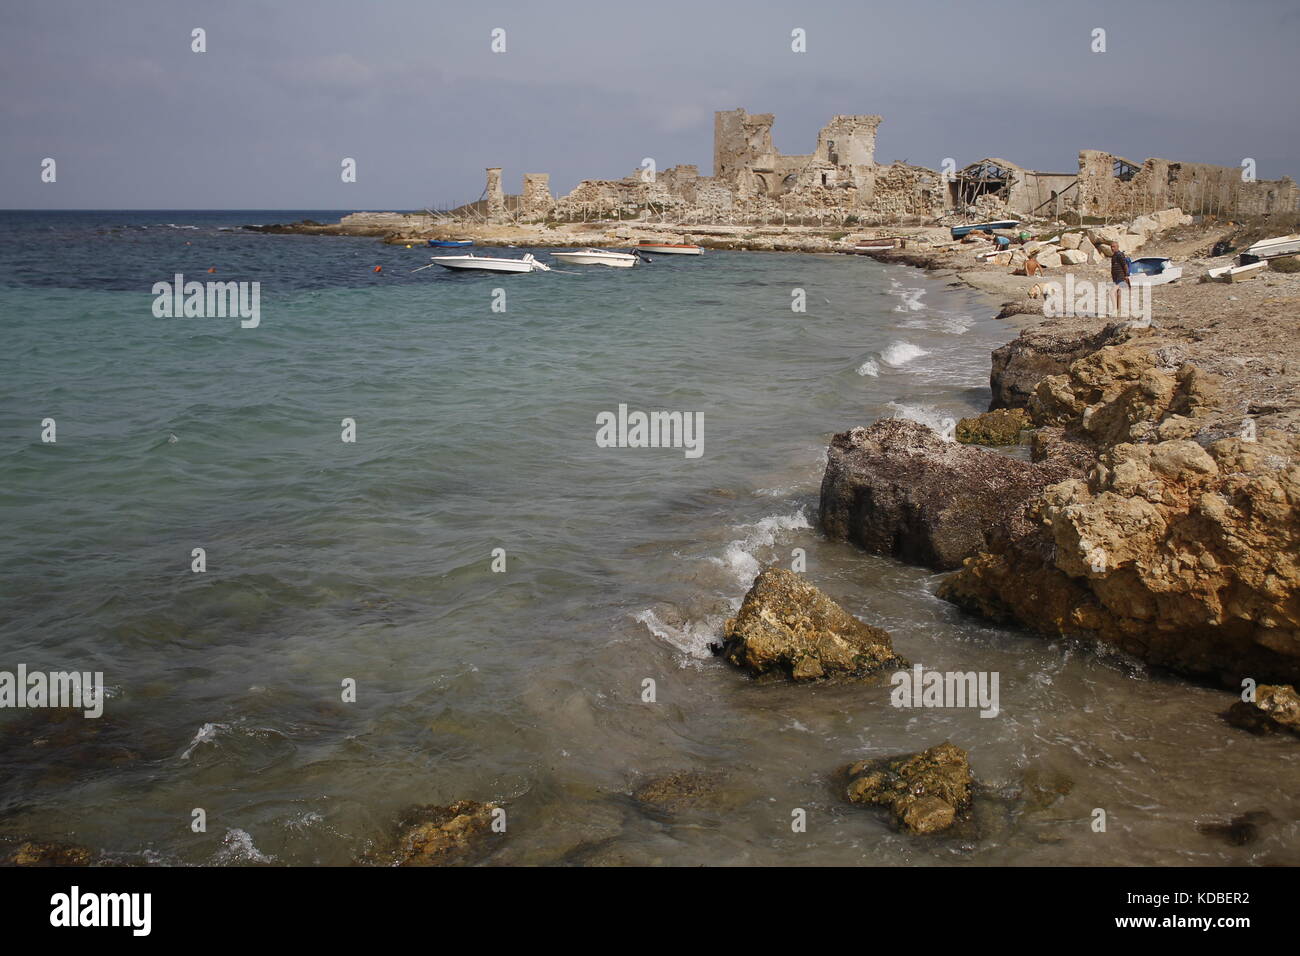 Sicily, Italy. Ruins in the shore a few miles from the city Trapani Stock Photo